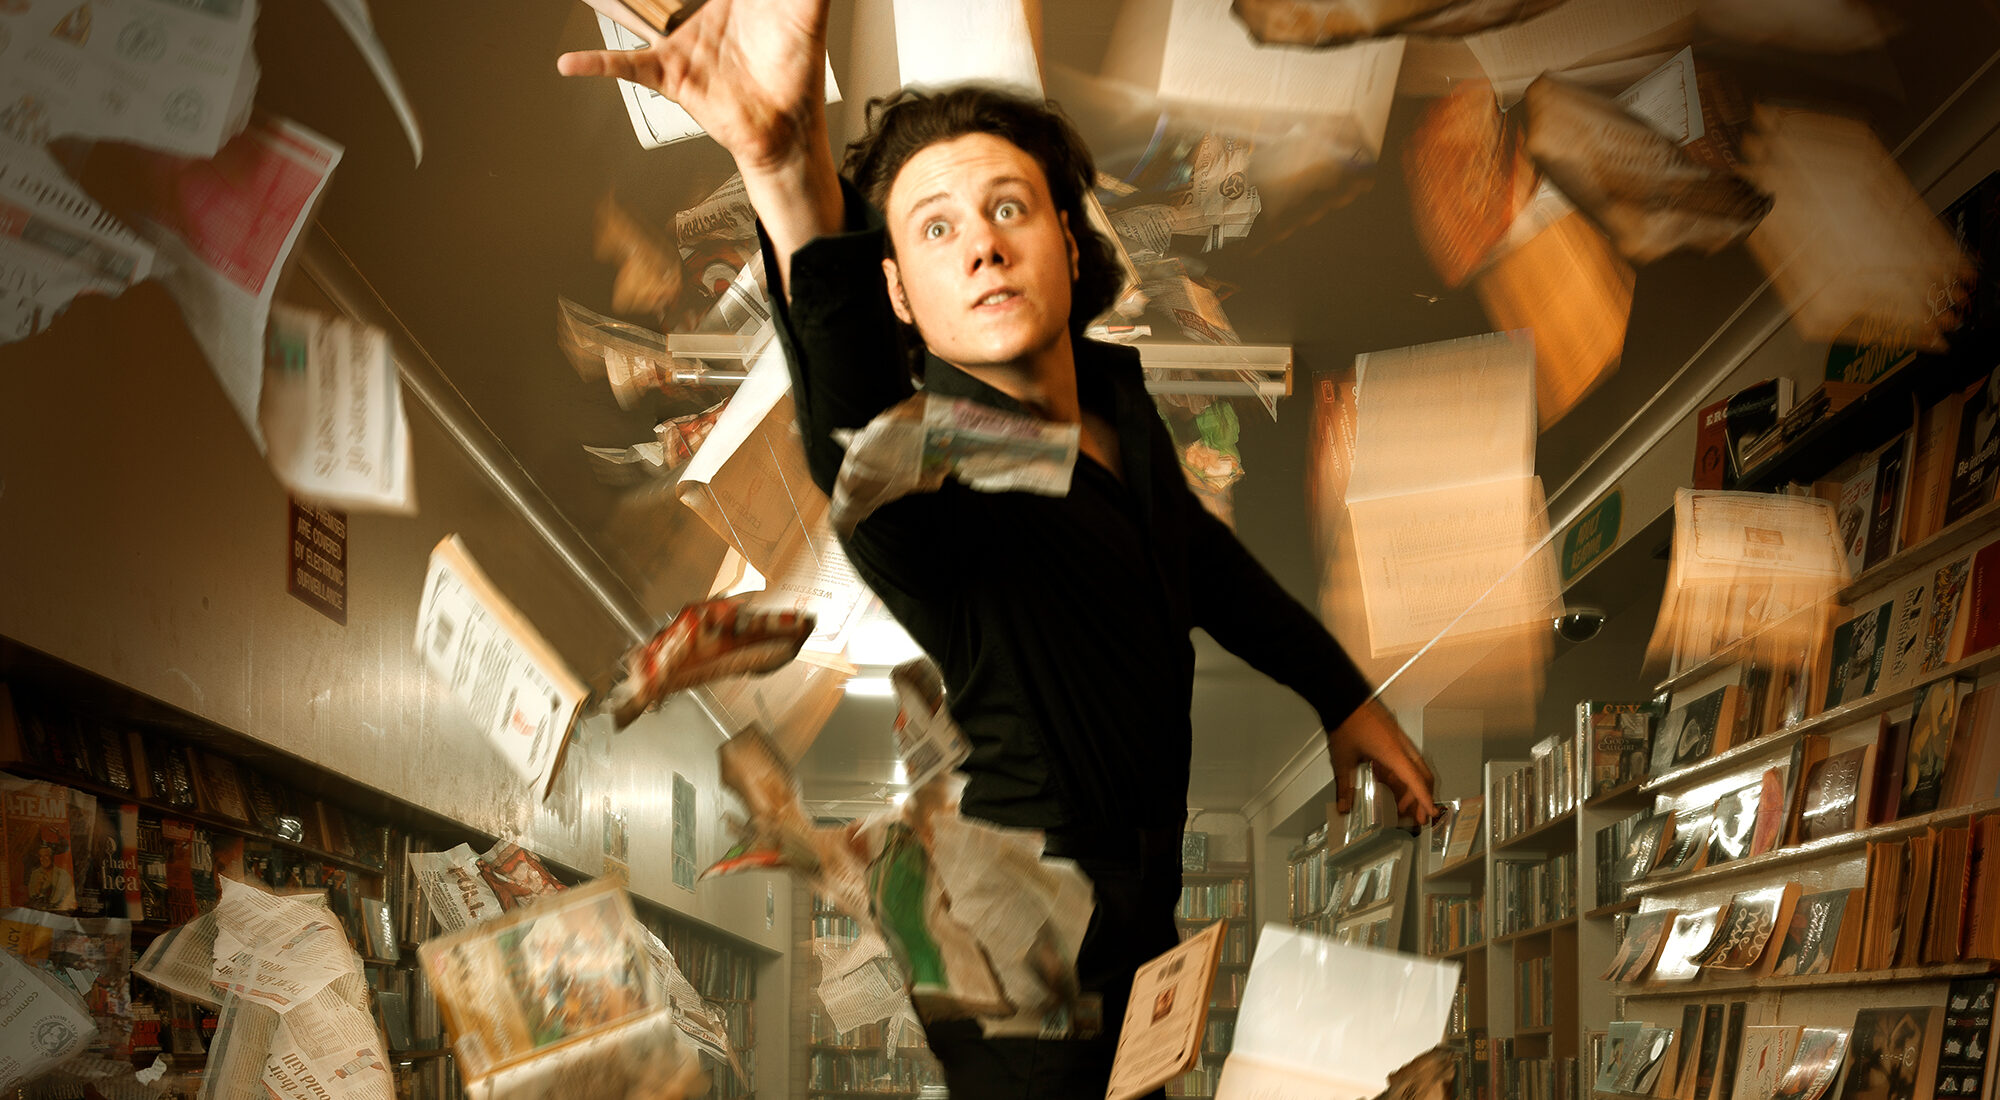 A person flying through a pile of paper in a bookstore.